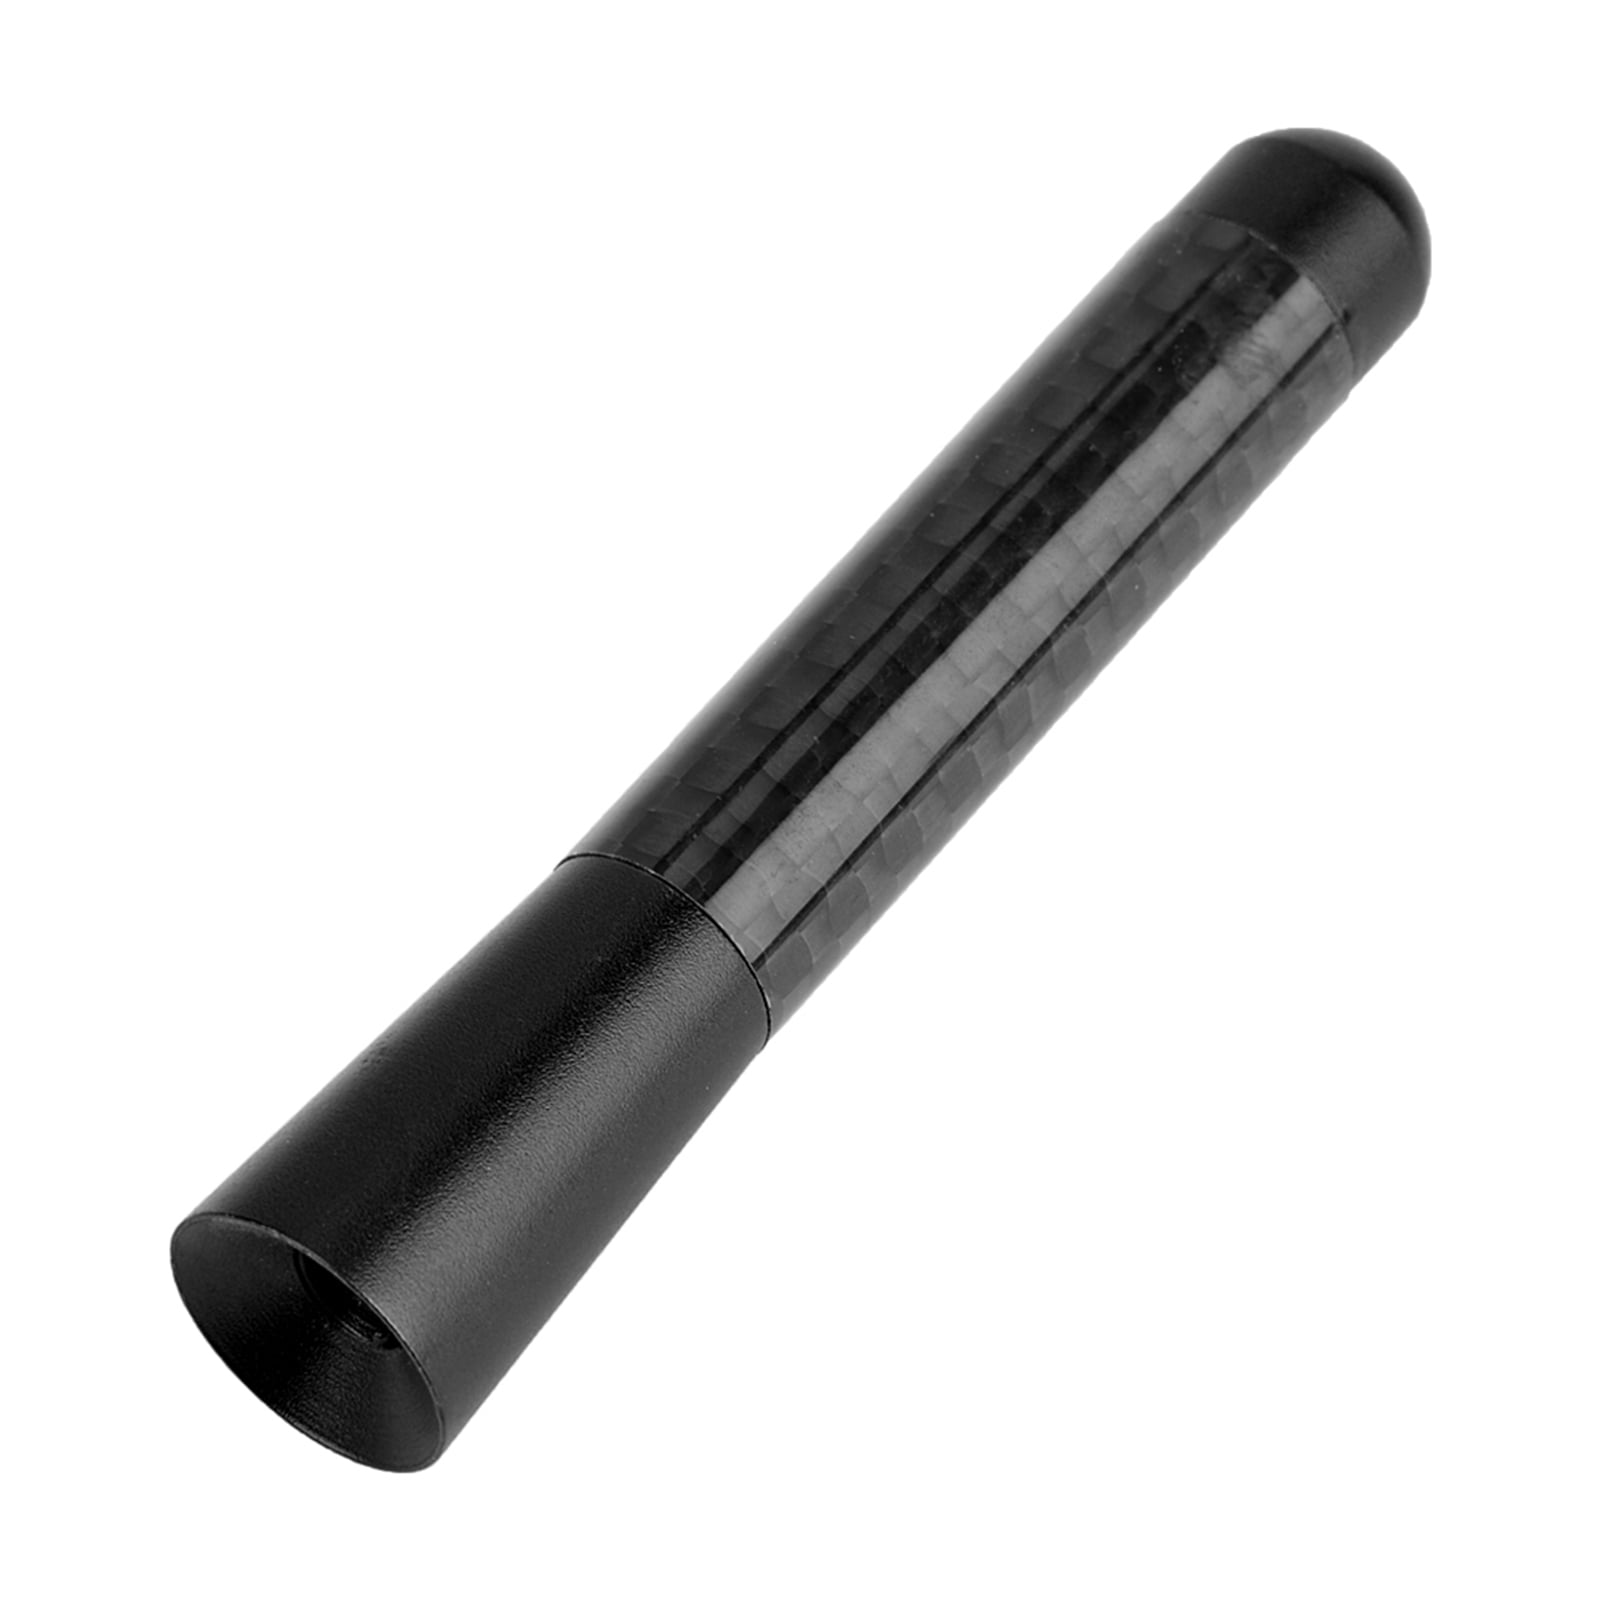 Car Replacement Antenna High Efficiency Replacement Antenna Safe And Stable Amateur Transceiver Antenna 3? Antenna For Car Repair Shop